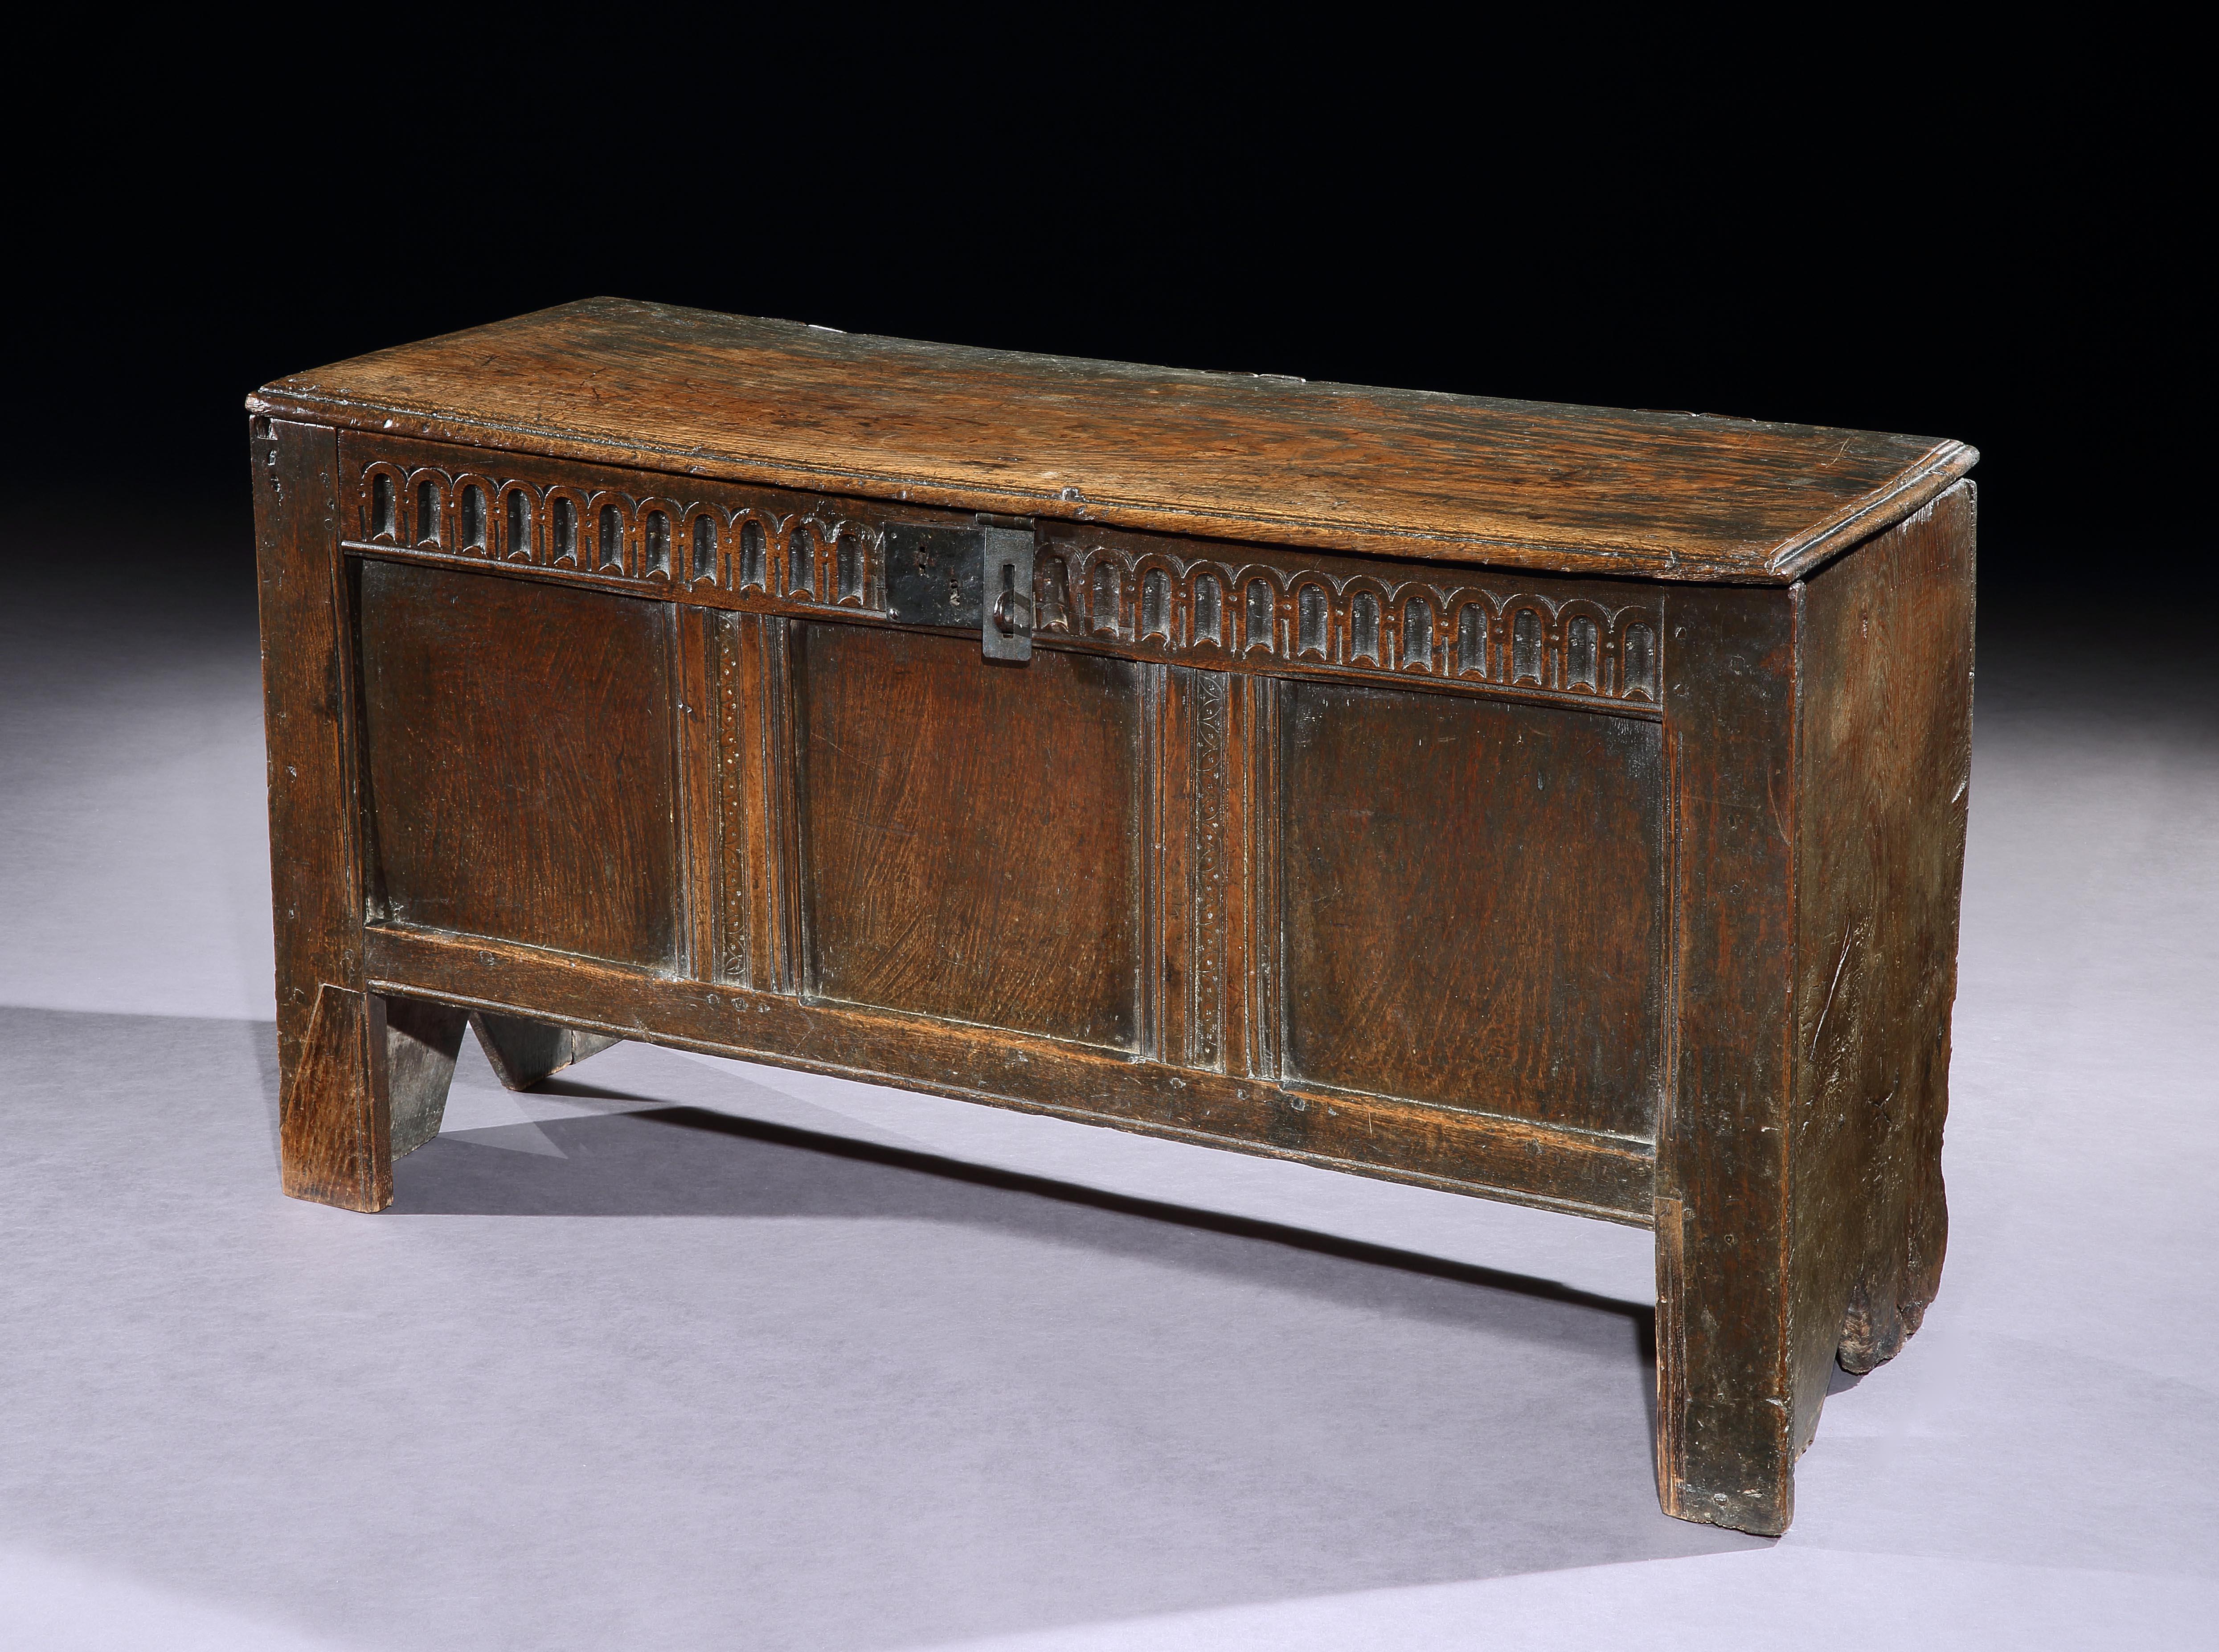 A mid-17th century transitional oak chest, from the collection of John Butler Yeats & the Yeats family by descent

This charming chest has an exceptional provenance coming by descent from the collection of John Butler Yeats the artists who is best